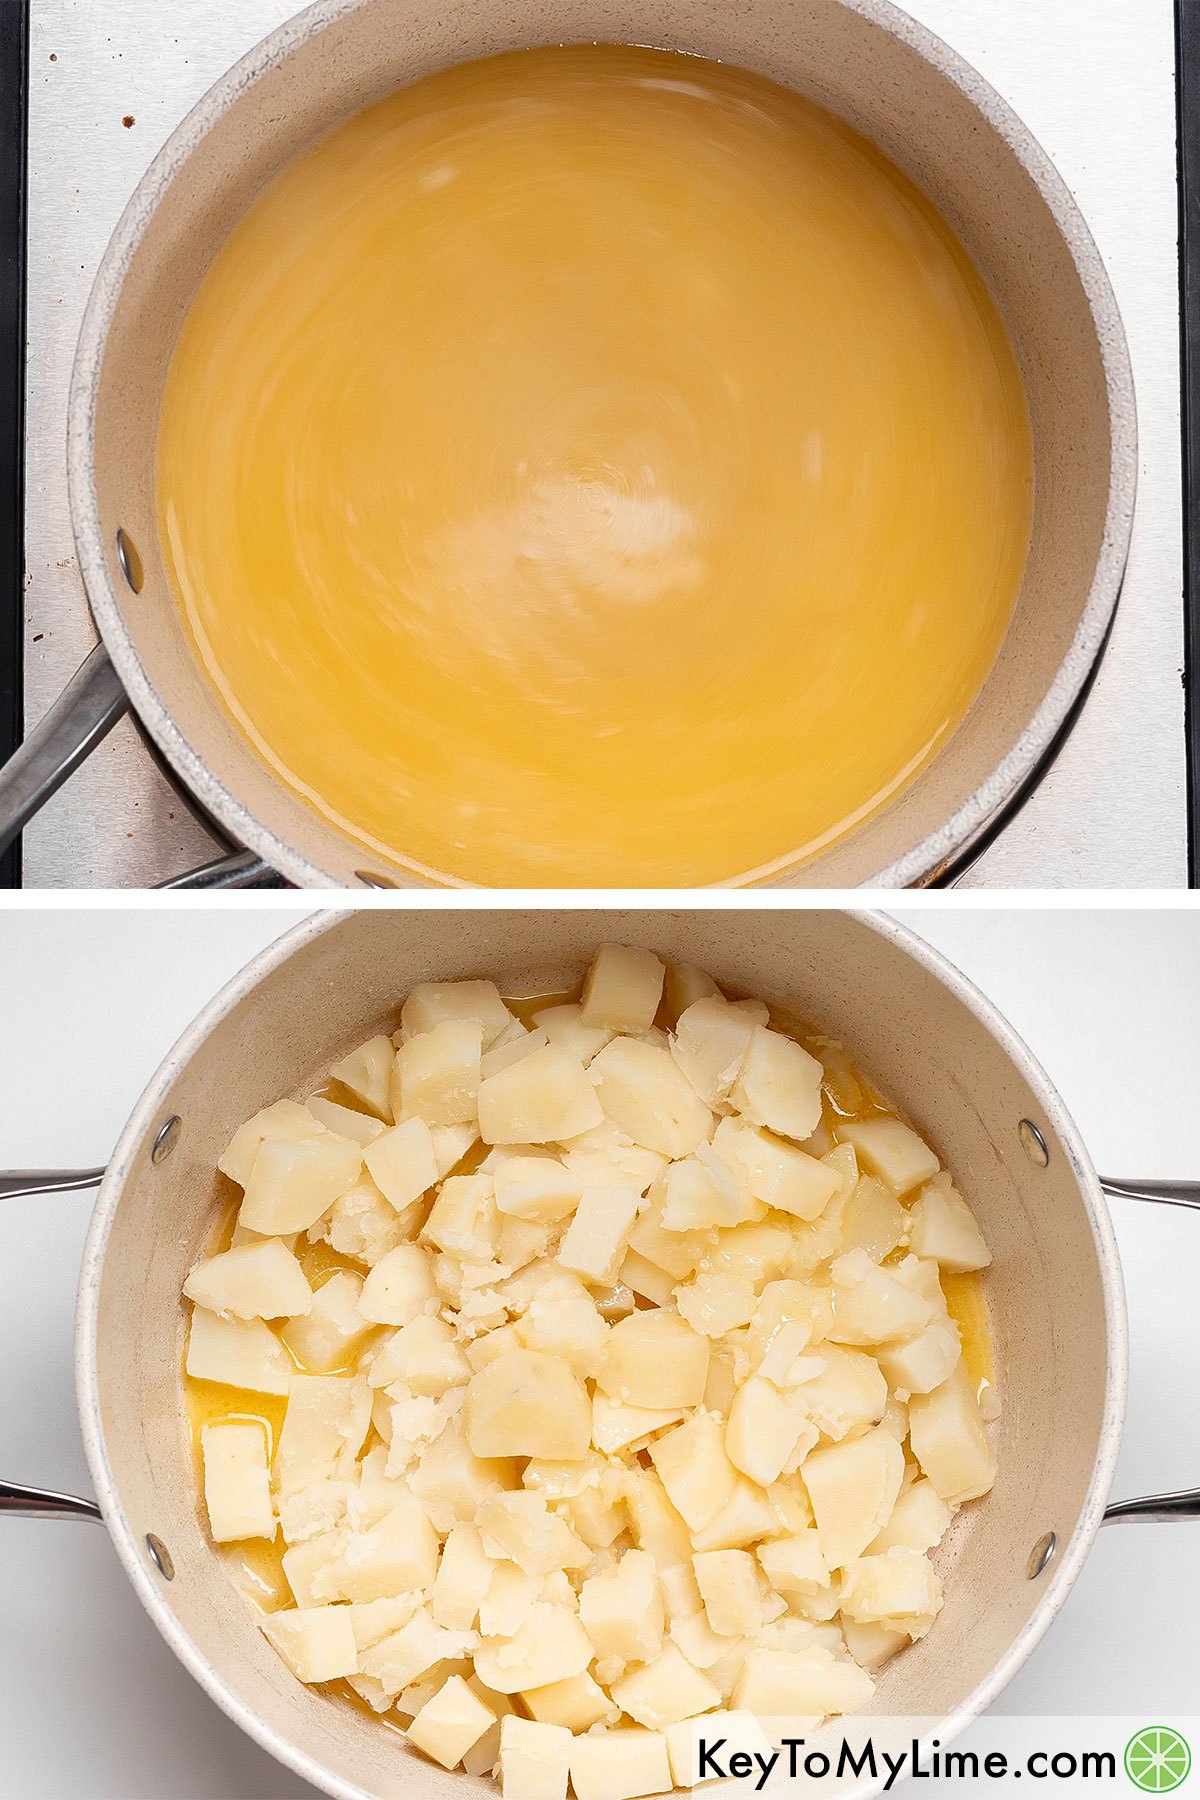 Adding the melted butter and broth mixture to the drained potatoes.